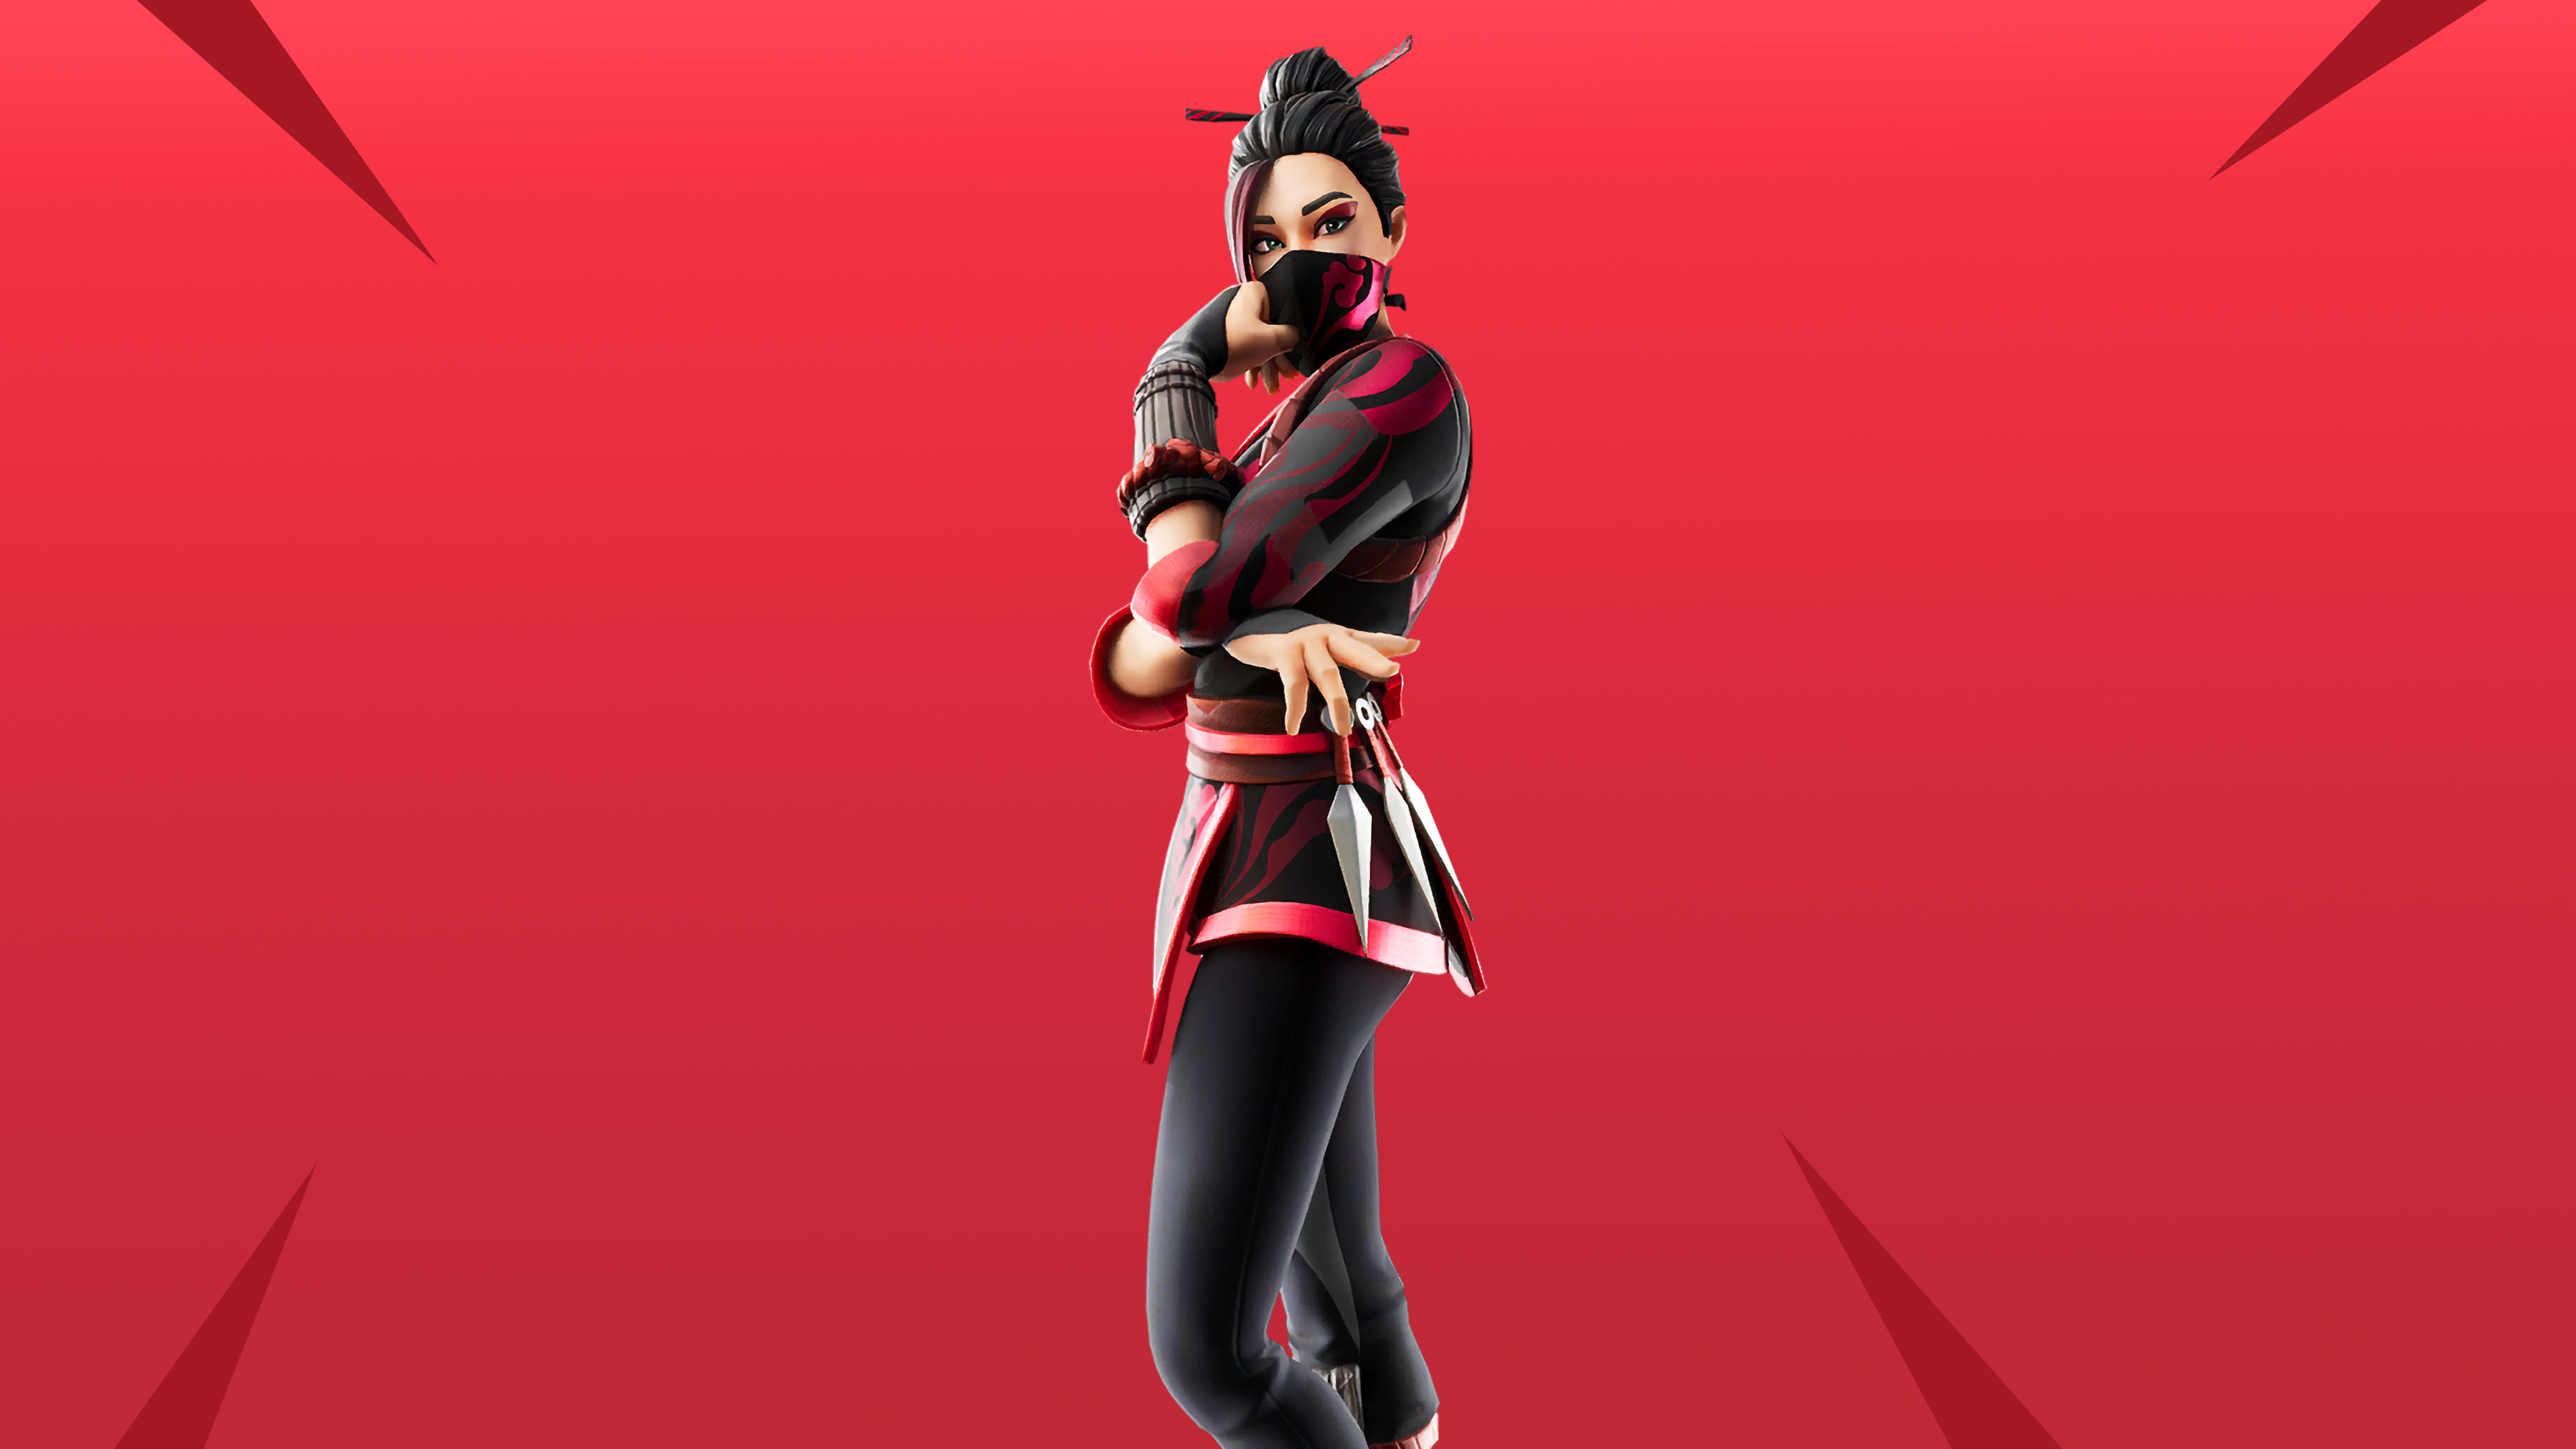 48x1152 Red Jade Fortnite 4k 48x1152 Resolution Wallpaper Hd Games 4k Wallpapers Images Photos And Background